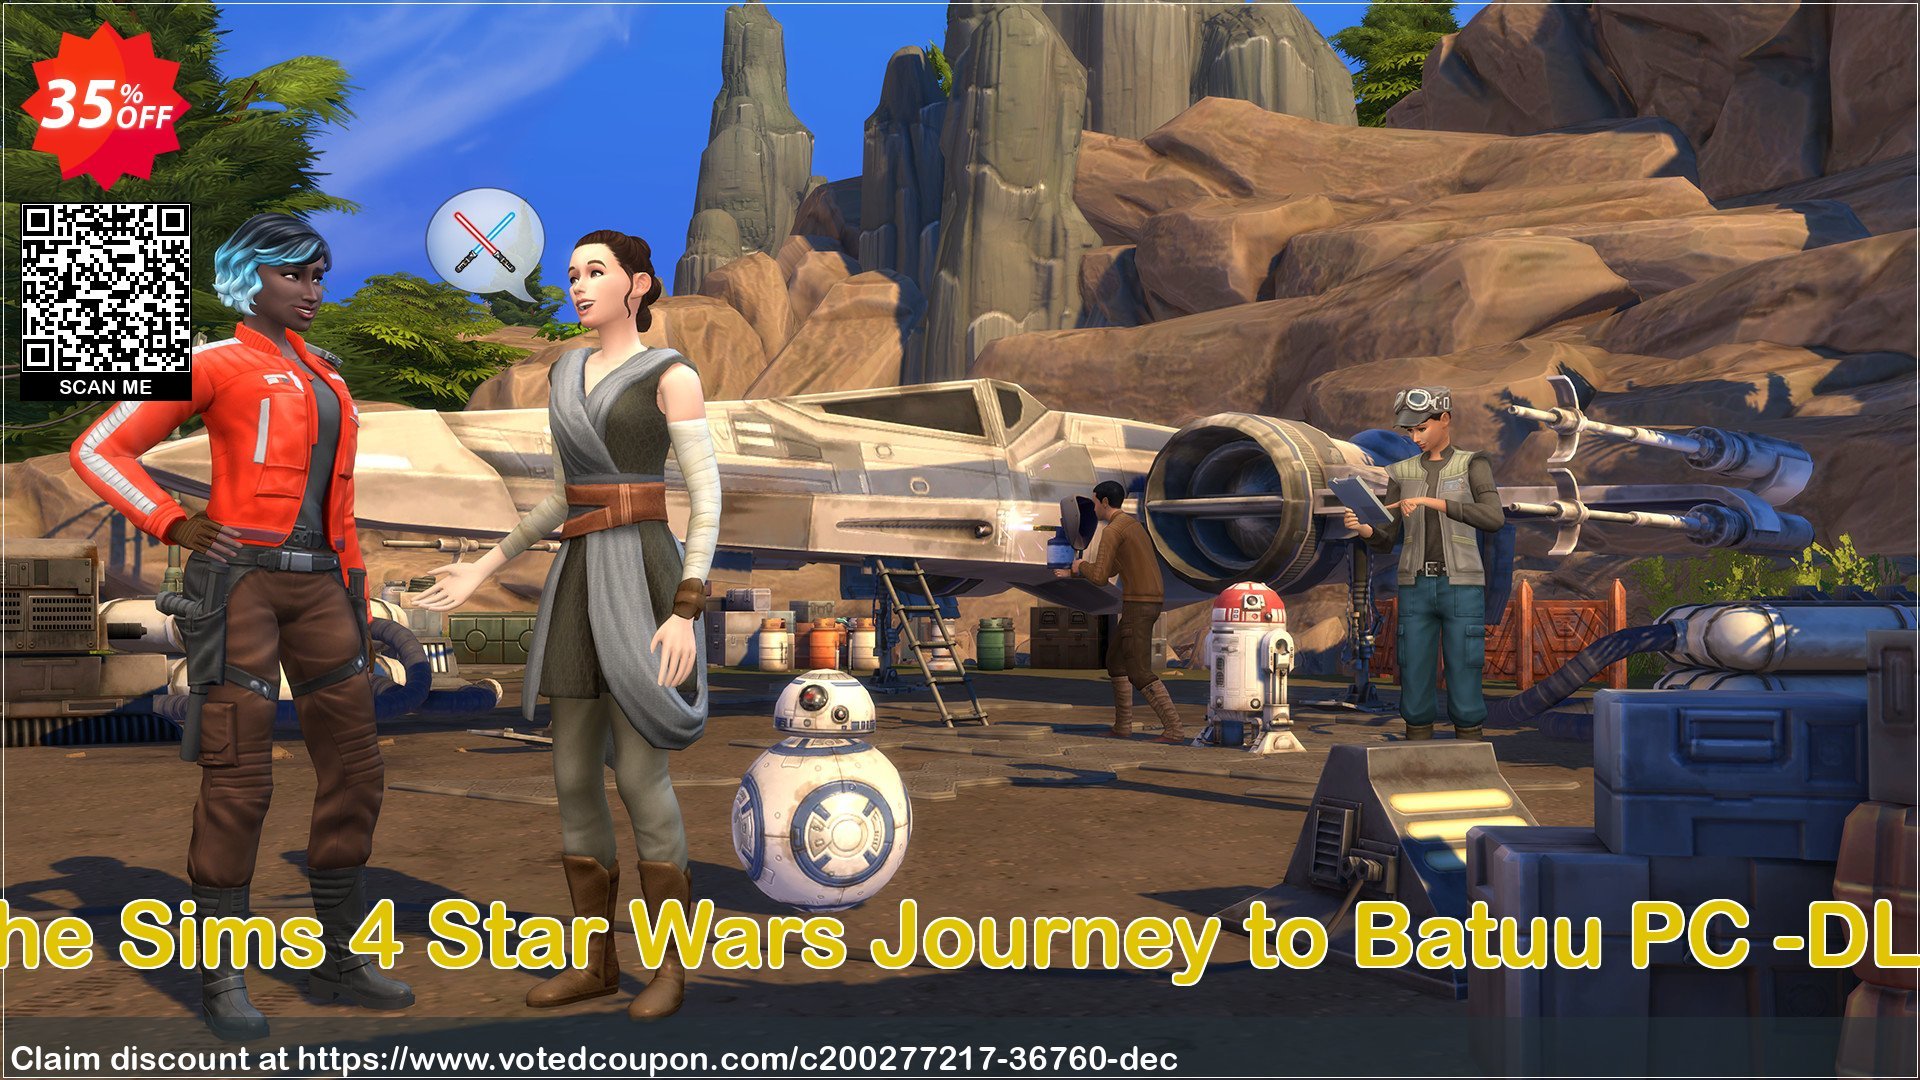 The Sims 4 Star Wars Journey to Batuu PC -DLC Coupon Code Apr 2024, 35% OFF - VotedCoupon